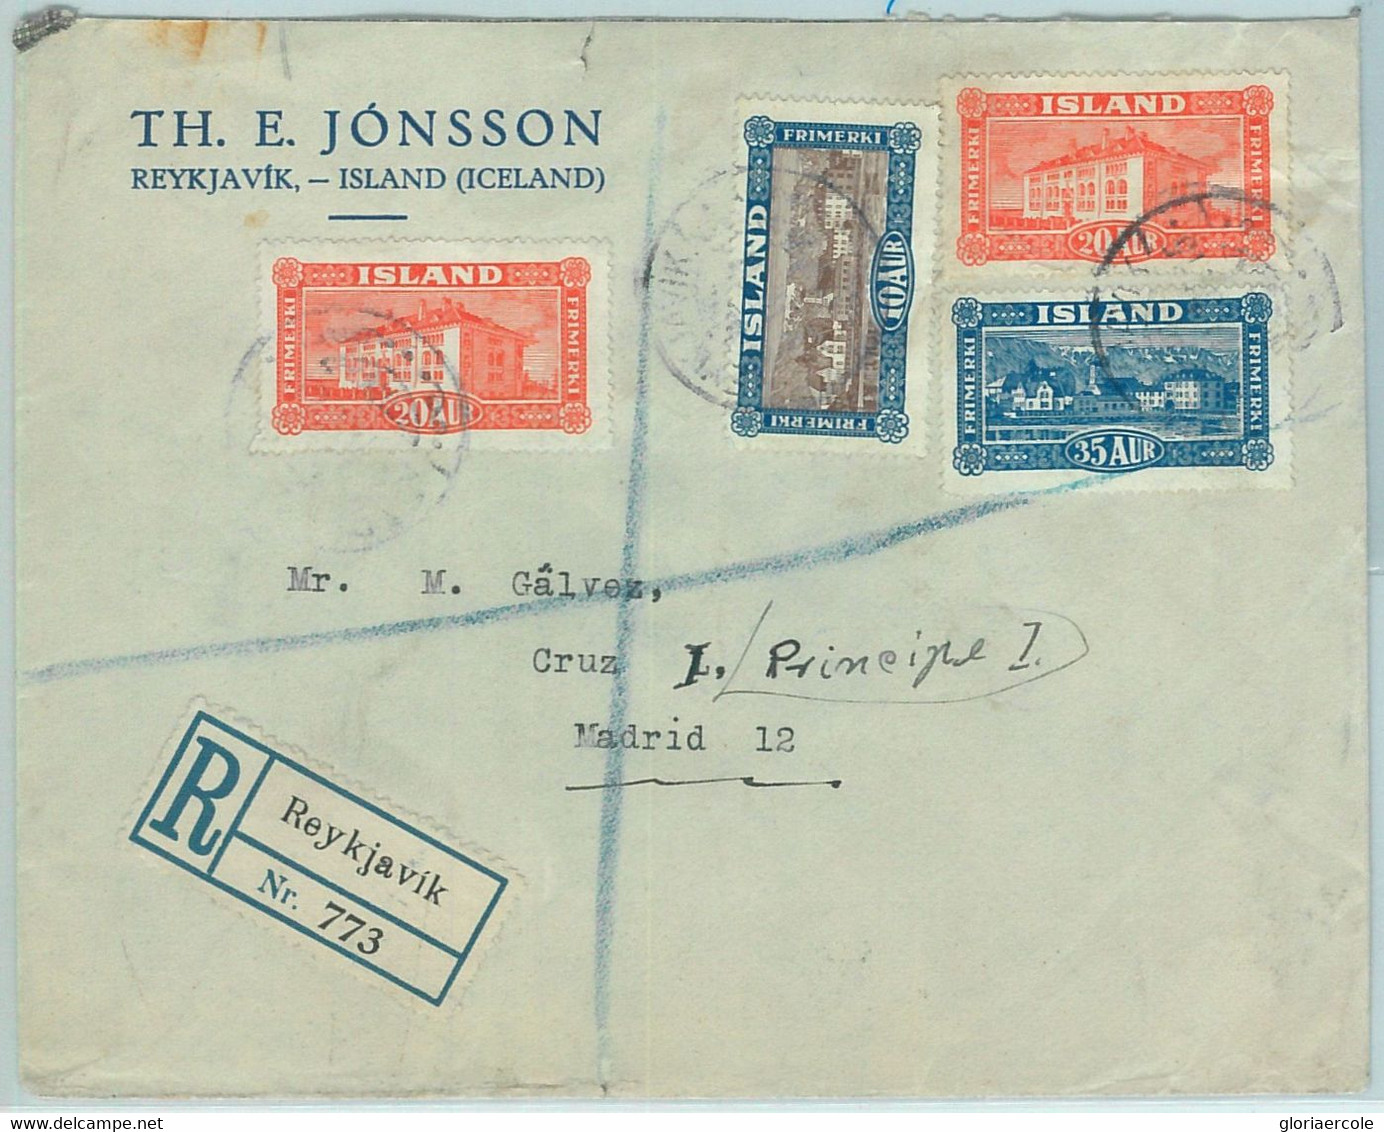 68789 - ICELAND  - Postal History -  REGISTERED COVER  To SPAIN Via GB  1931 - Covers & Documents